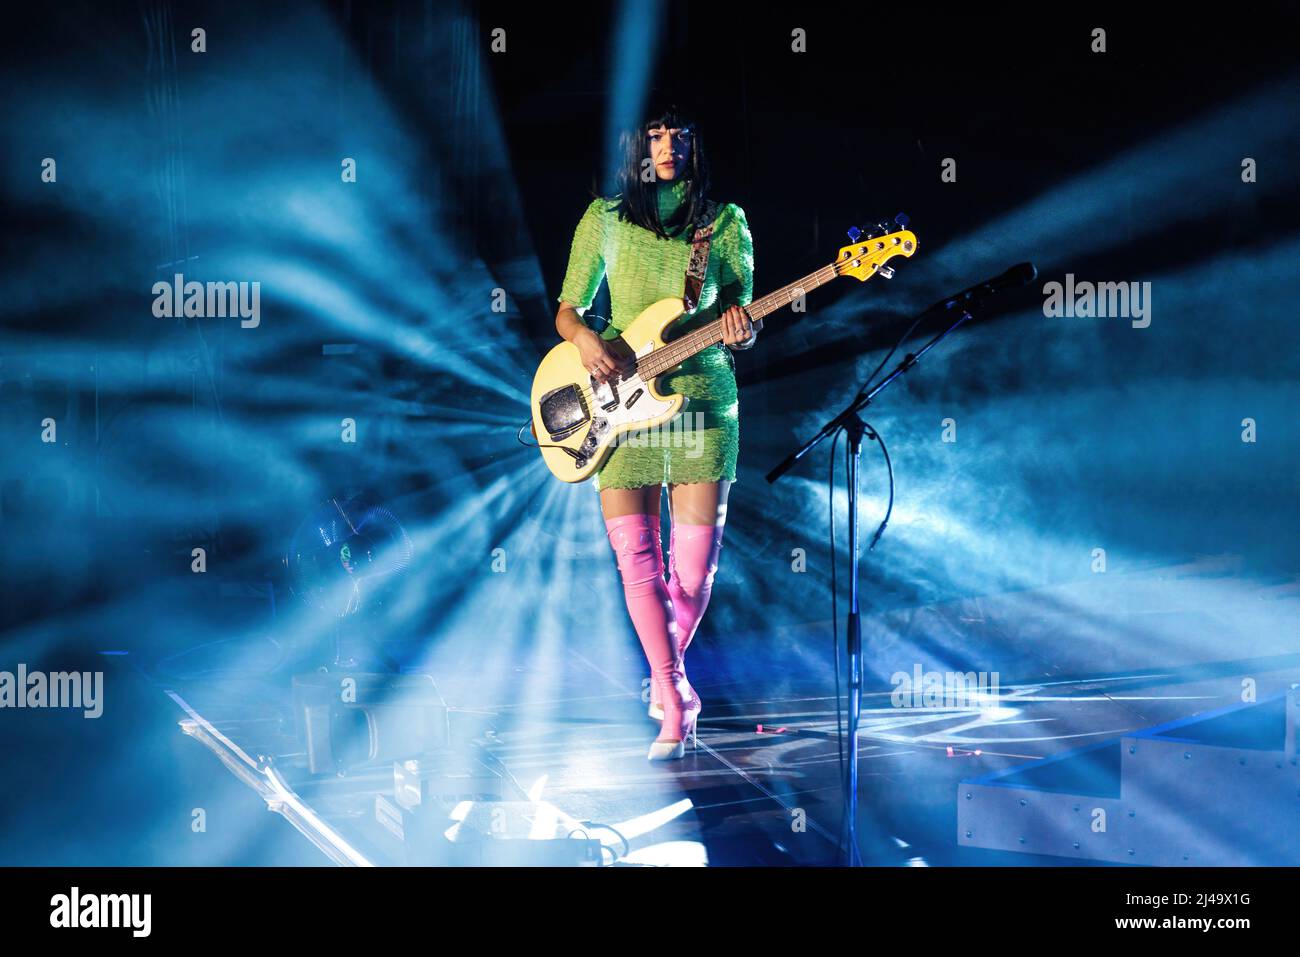 Copenhagen, Denmark. 10th, April 2022 The American funk trio Khruangbin performs a live concert at HB Hallen in Copenhagen. Here bass player Laura Lee is seen live on stage. (Photo credit: Gonzales Photo - Peter Troest). Stock Photo